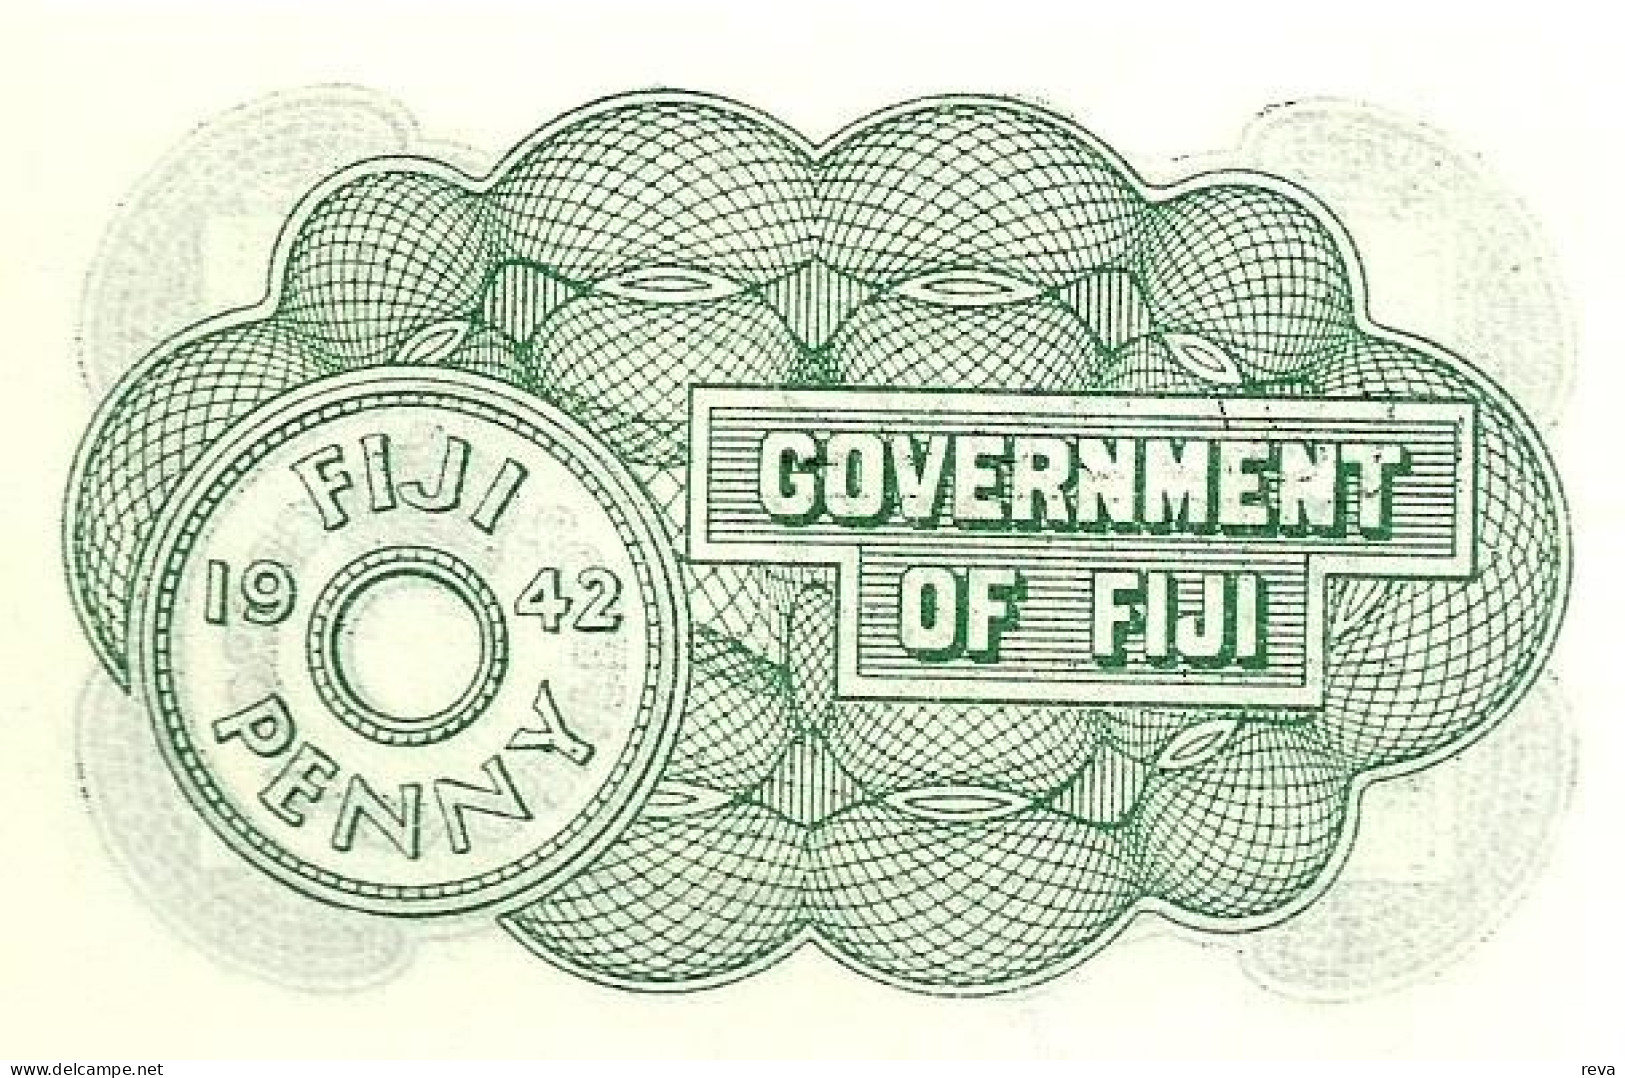 FIJI 1 PENNY GREEN COIN FRONT AND BACK DATED 01-07-1942 EF P.47a READ DESCRIPTION!! - Fiji